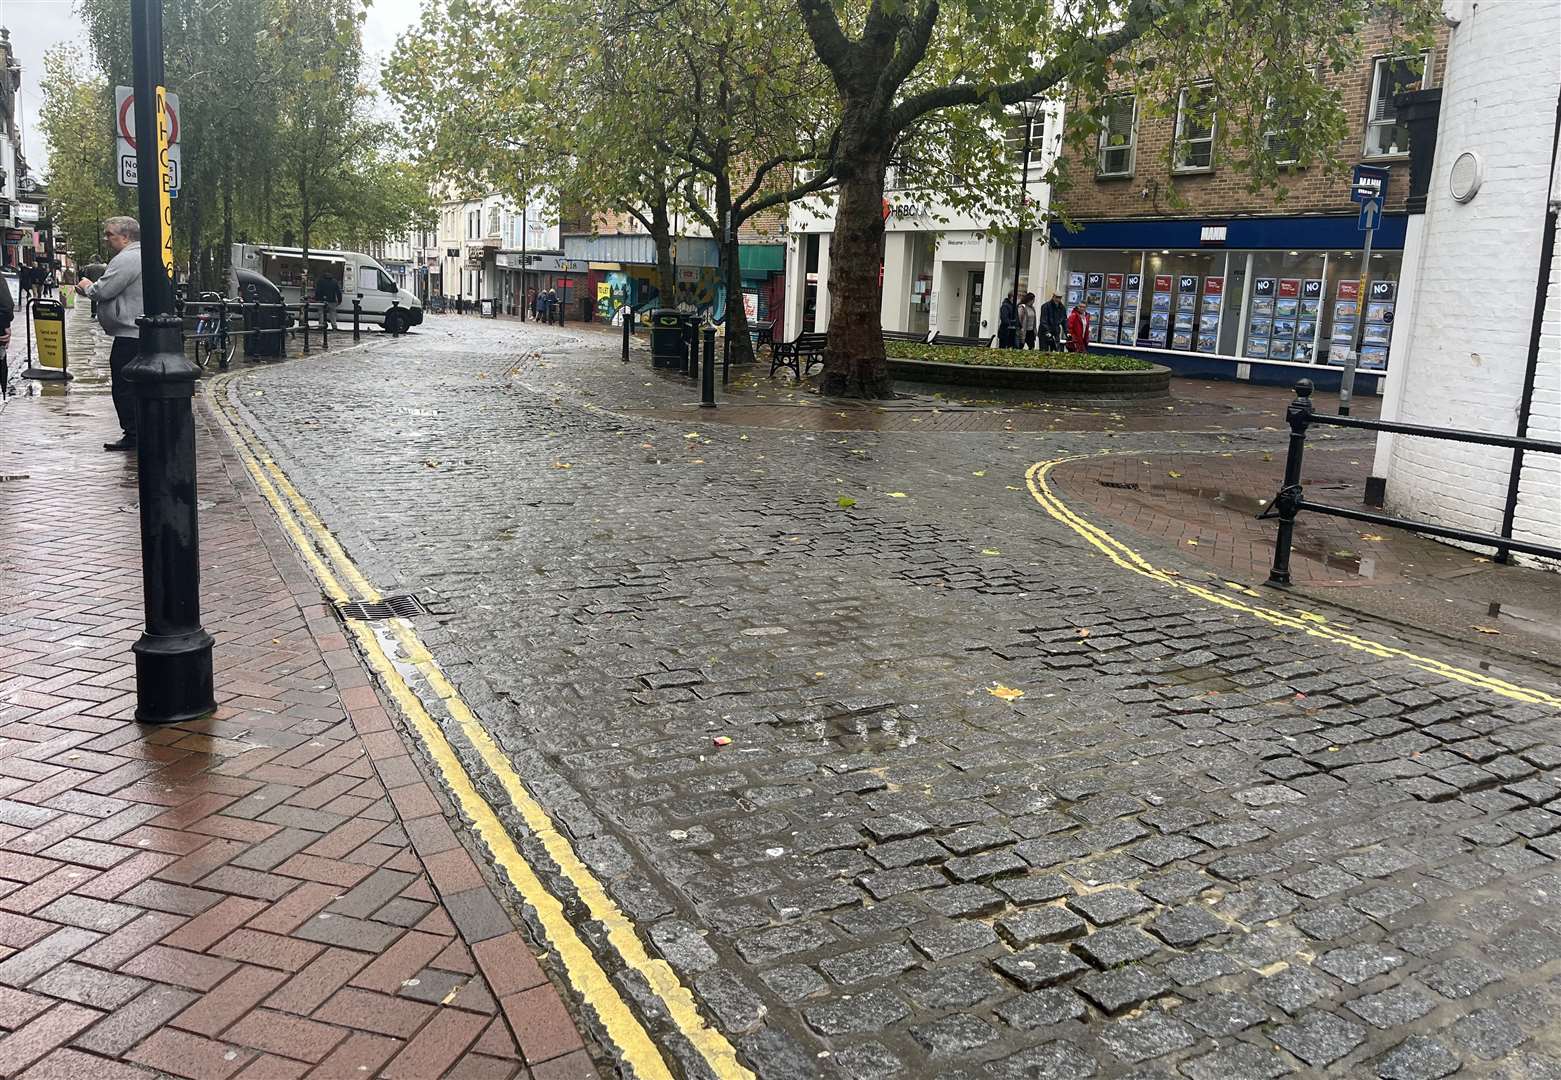 The uneven cobbles in Ashford town centre have sparked numerous complaints over the years